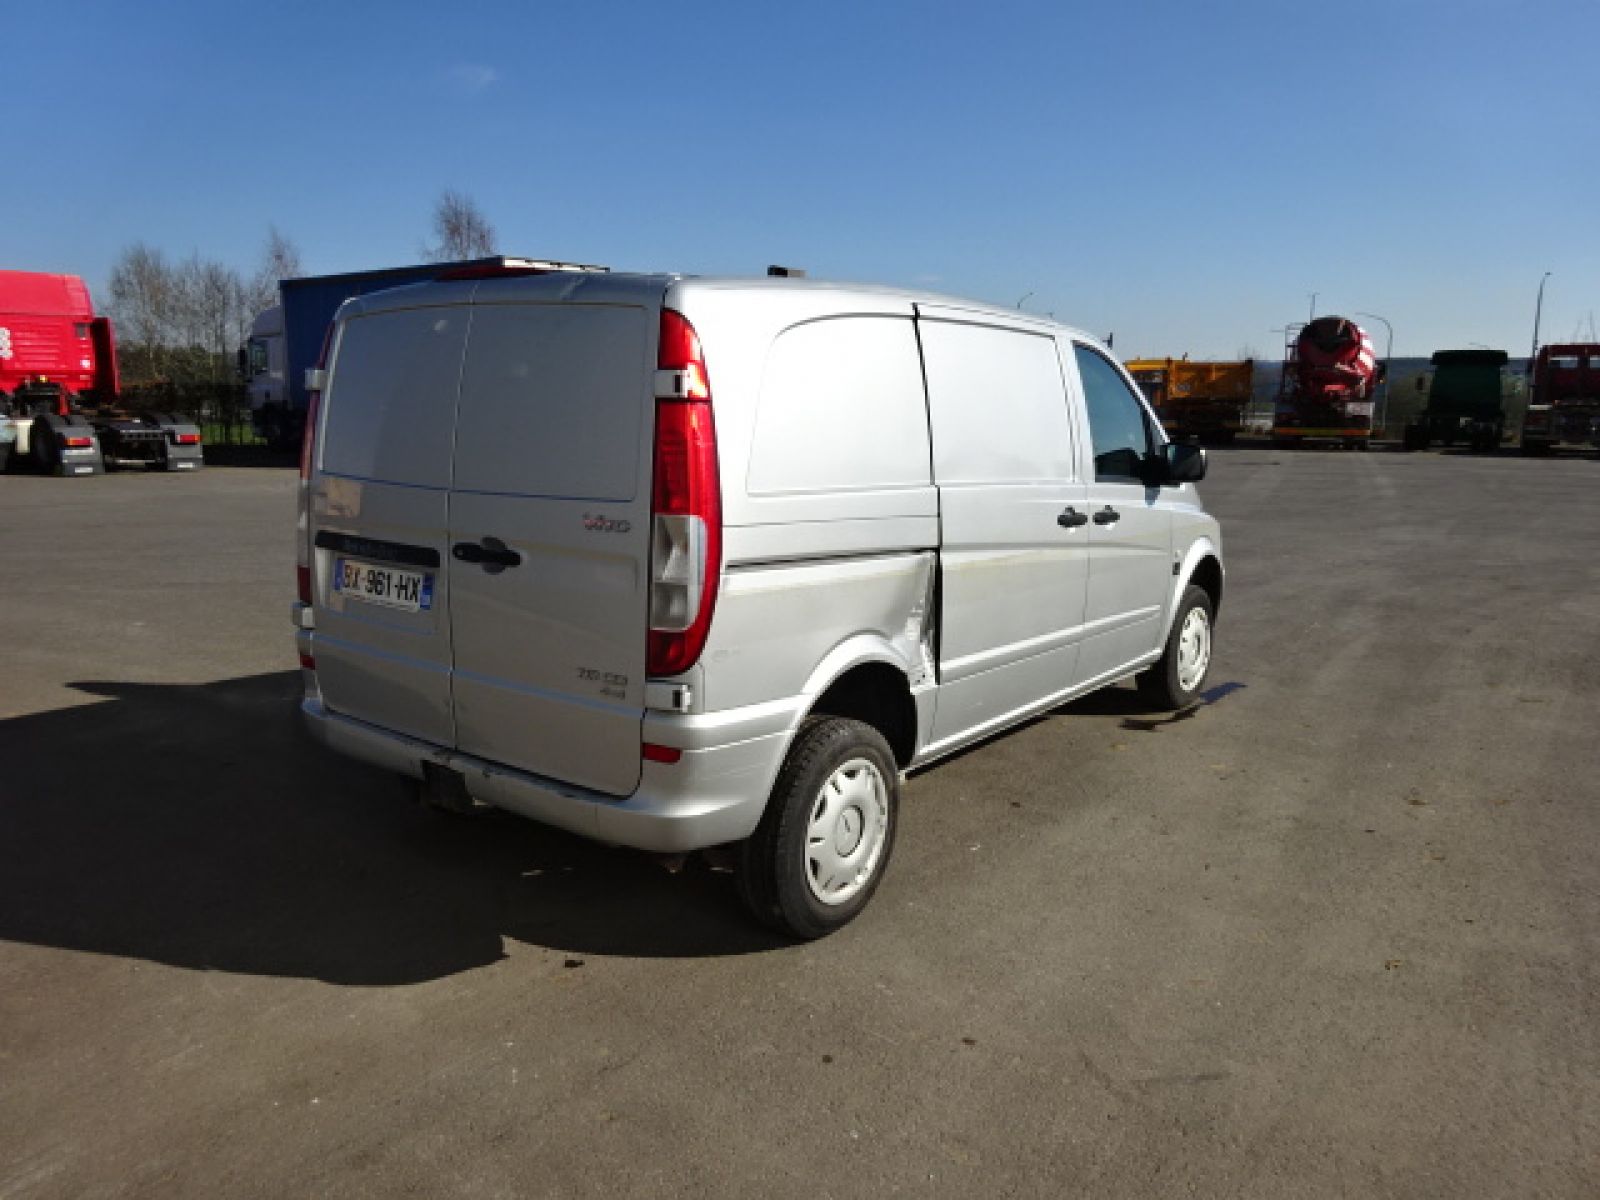 Vente occasion  Divers - MERCEDES VITO 113 cdi 113 CDI Fourgonnette (Belgique - Europe) - Houffalize Trading s.a.